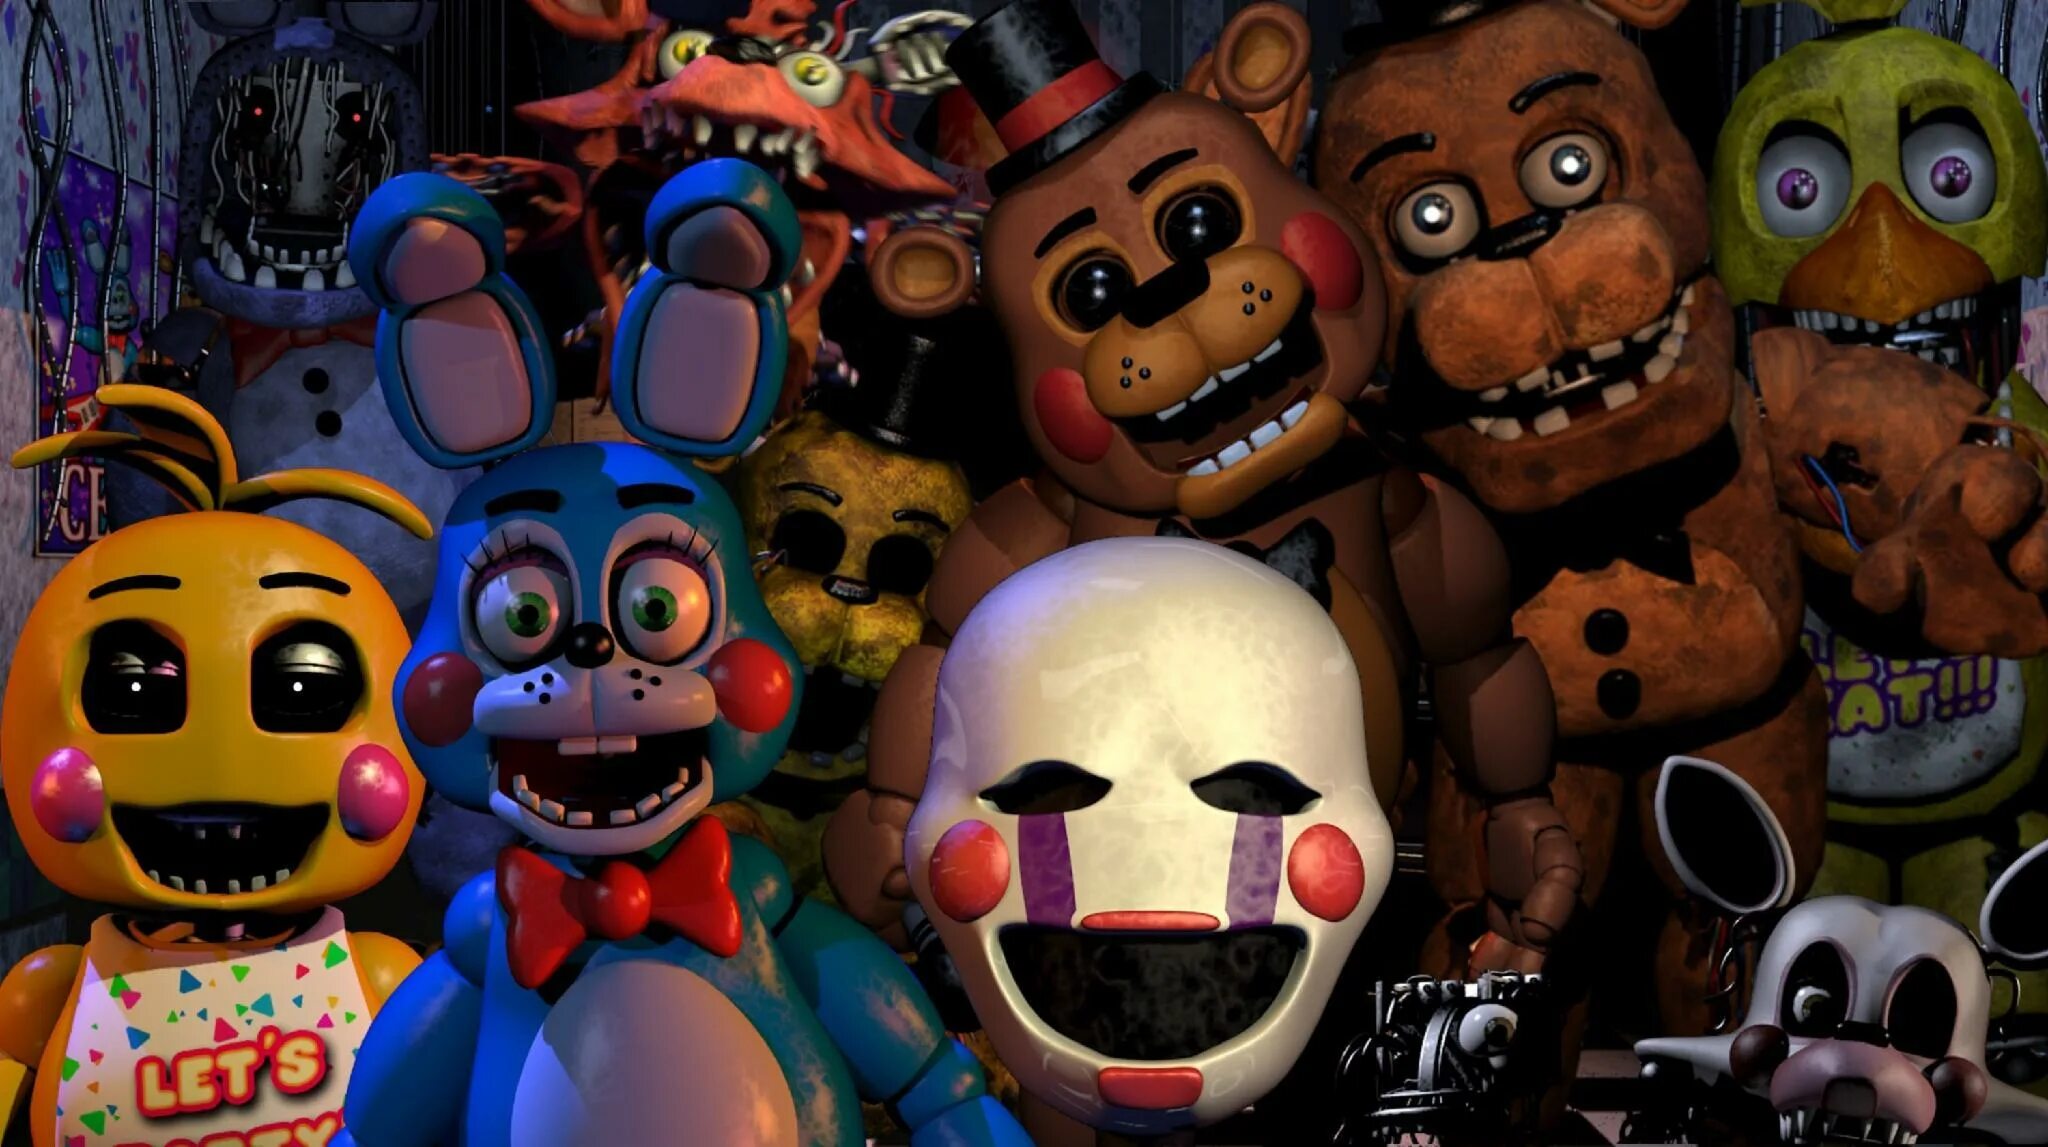 Five Nights at Freddy's 5 АНИМАТРОНИКИ. АНИМАТРОНИКИ ФНАФ 2. Пять ночей с Фредди 5 АНИМАТРОНИКИ. FNAF 2 АНИМАТРОНИКИ. Аниматроников five nights at freddy